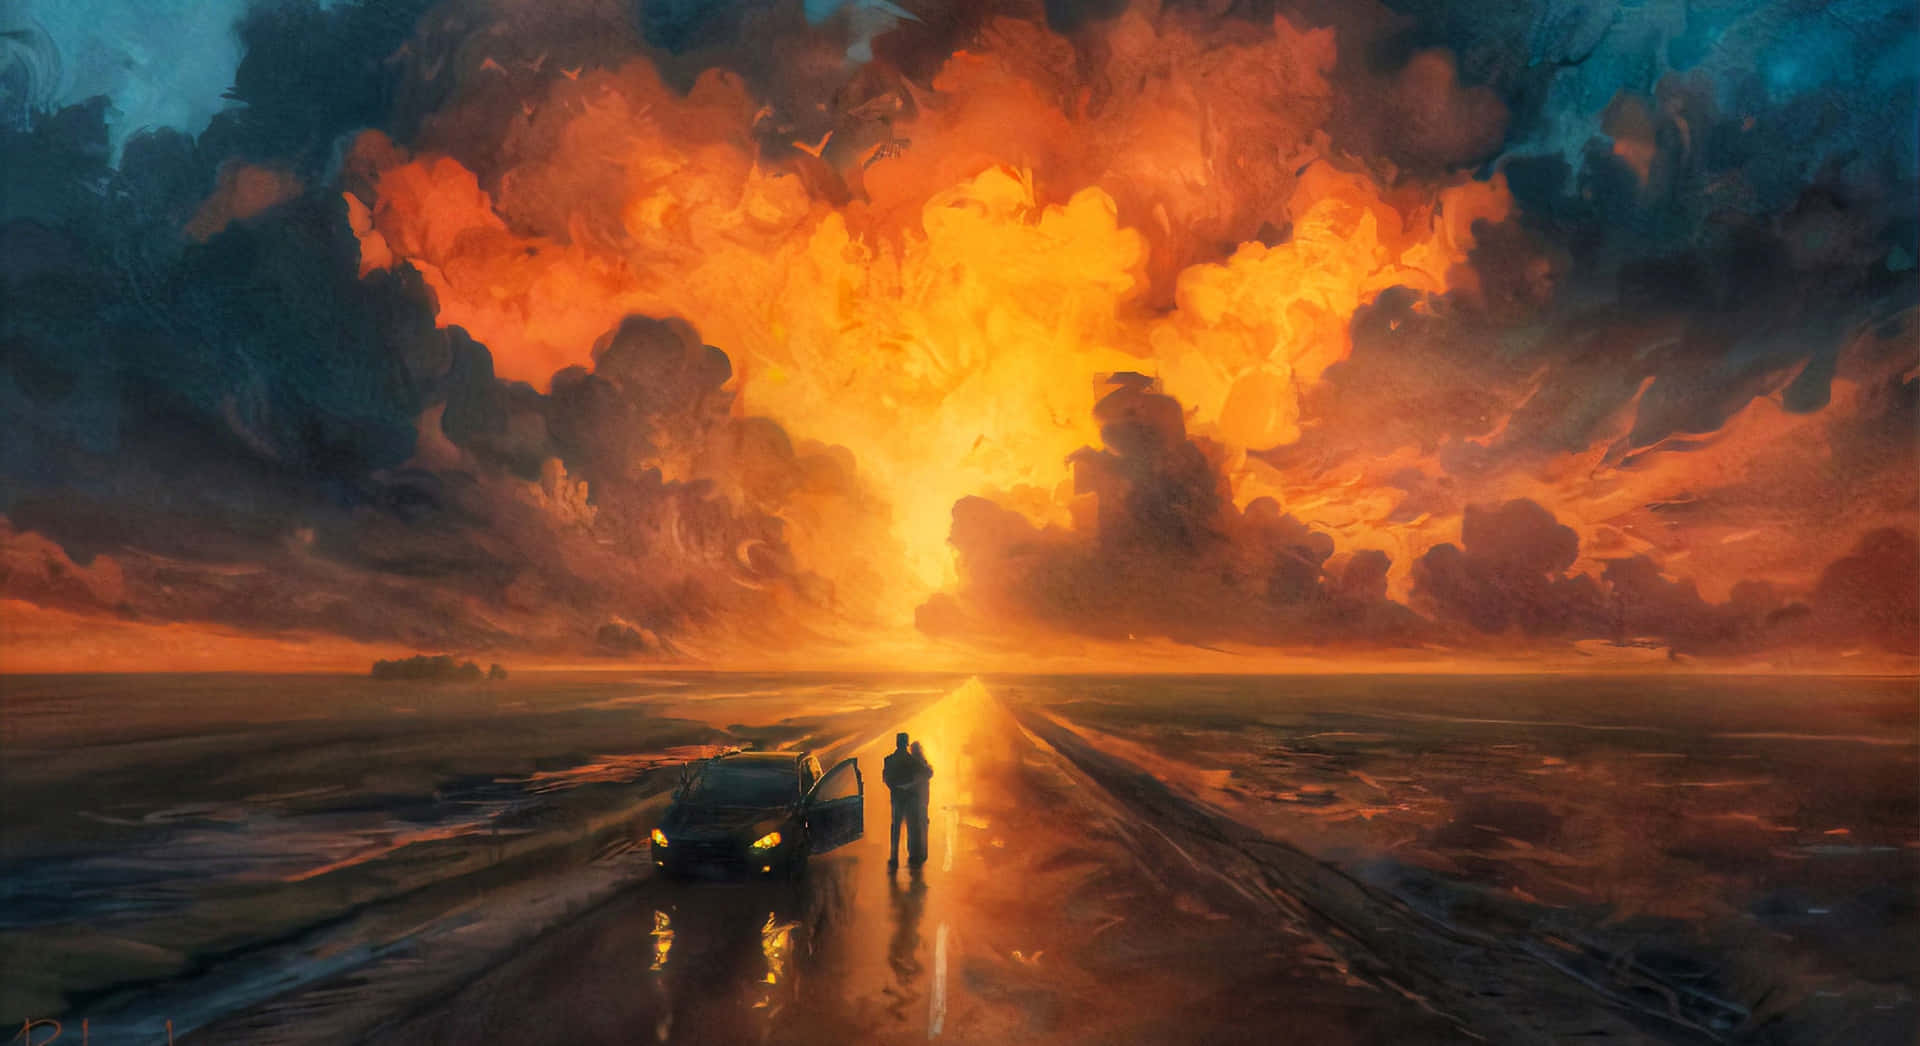 A Painting Of A Car Driving Down A Road With A Fire